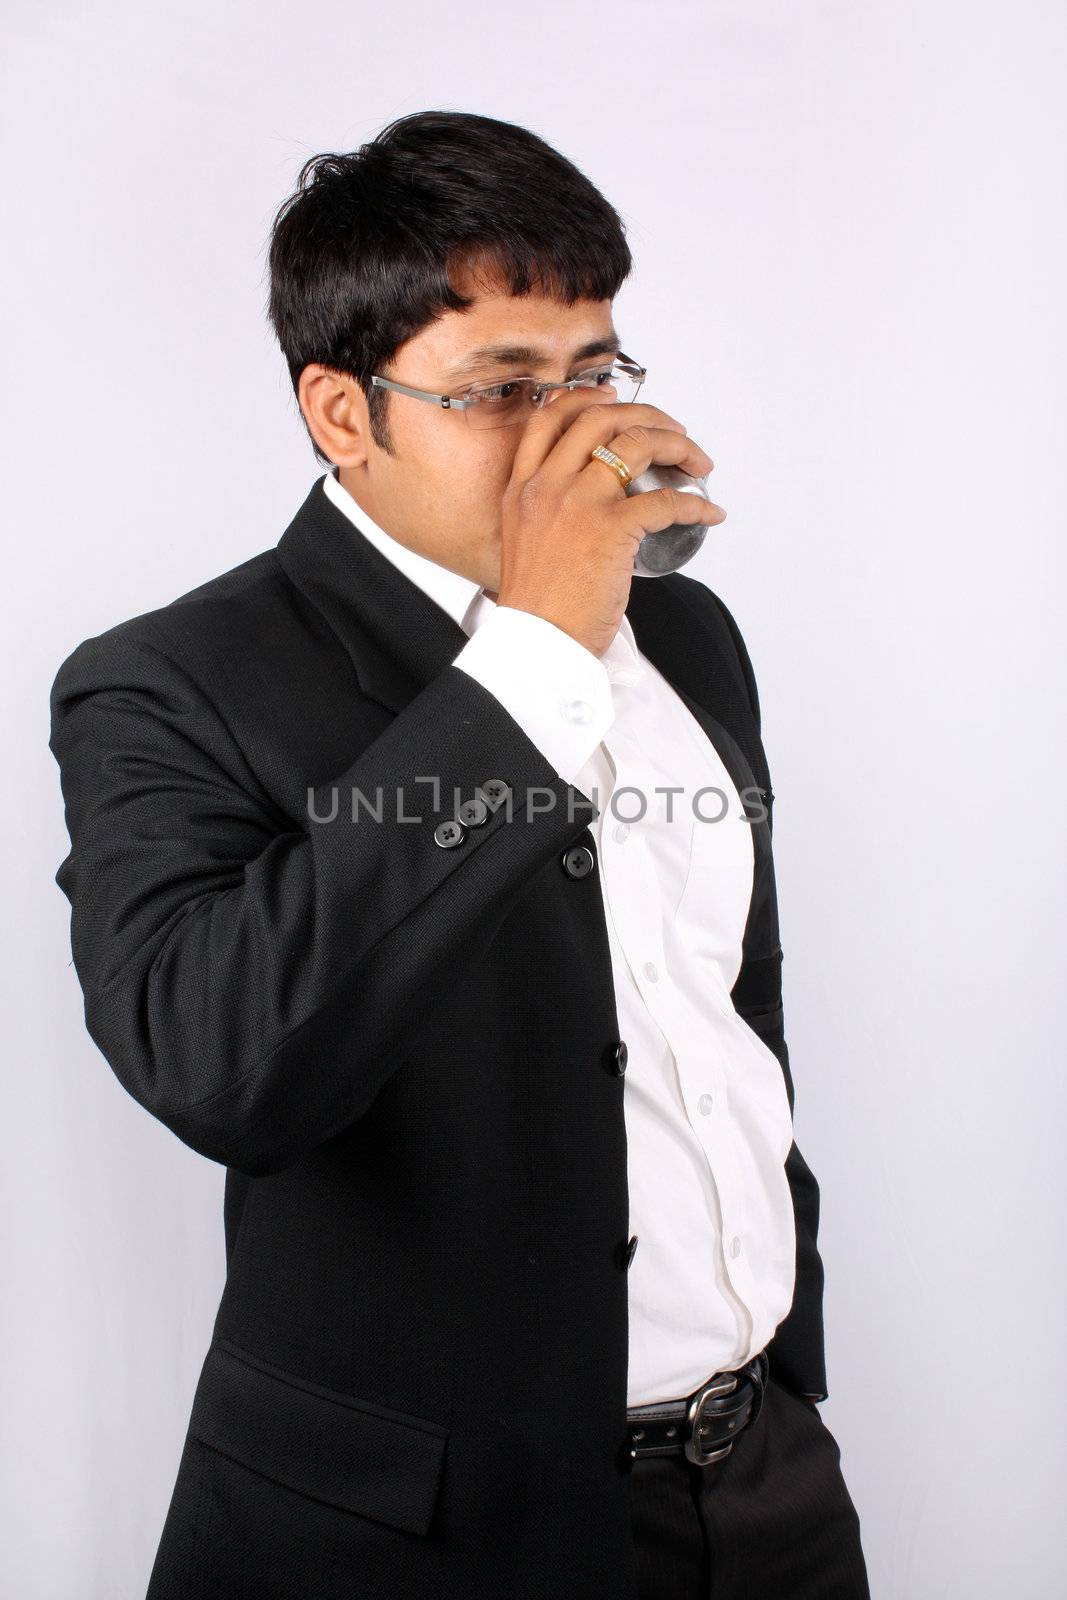 An Indian businessman drinking coffee during office break, on white studio background.